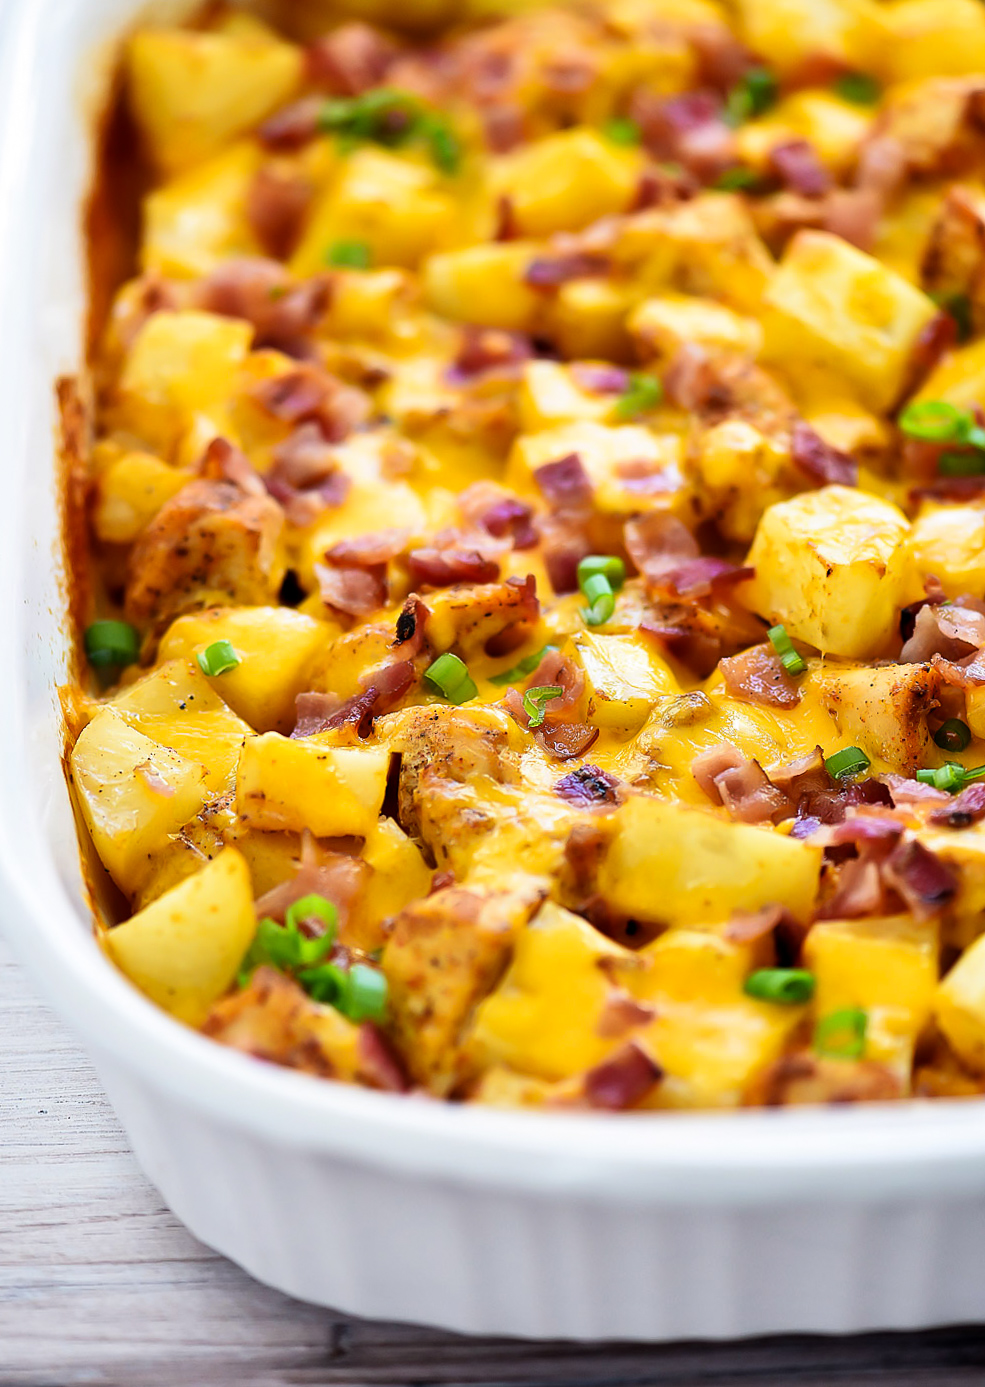 Loaded Chicken and Potato Casserole is seasoned chicken and potatoes that are baked together and then topped with bacon, cheese and green onion. Life-in-the-Lofthouse.com